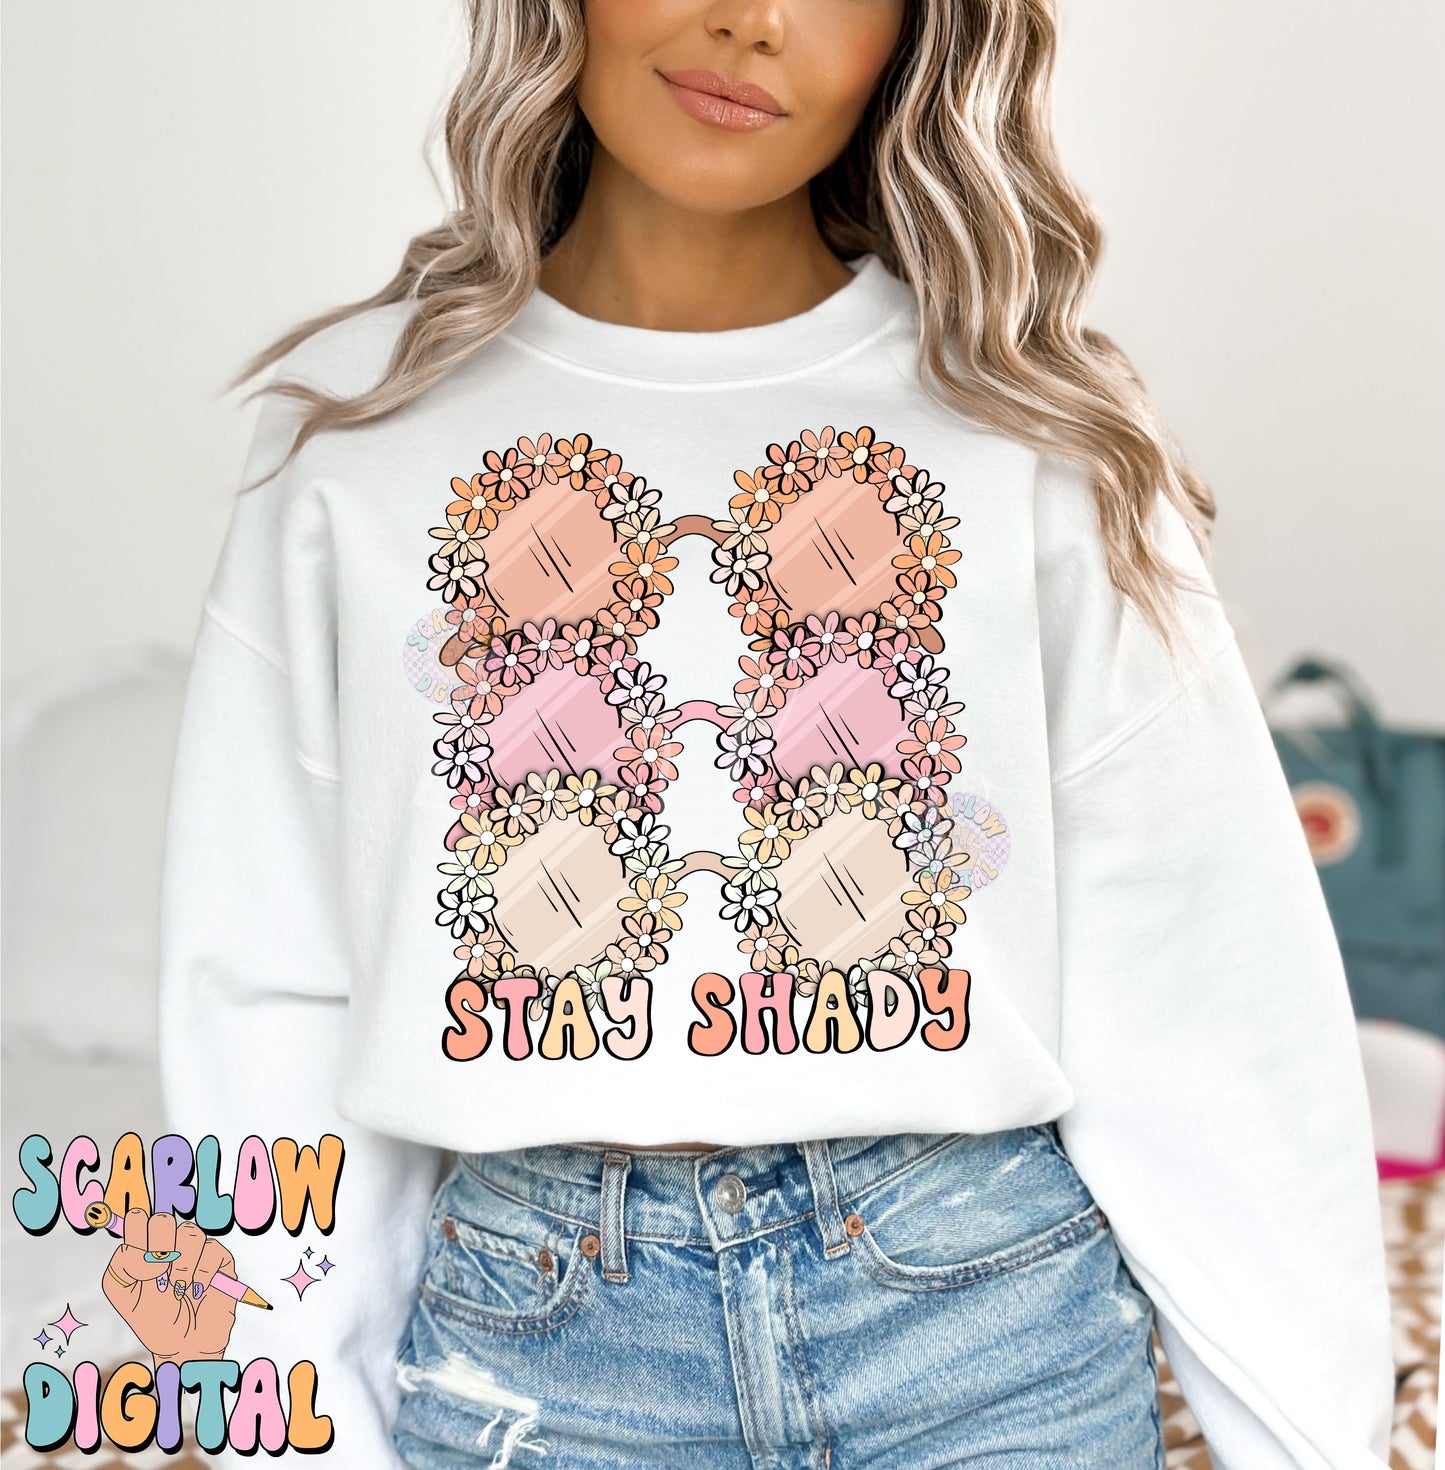 Stay Shady PNG-Floral Sunglasses Sublimation Digital Design Download-flowers png, summertime png, boho girl png, sunnies png, girly designs